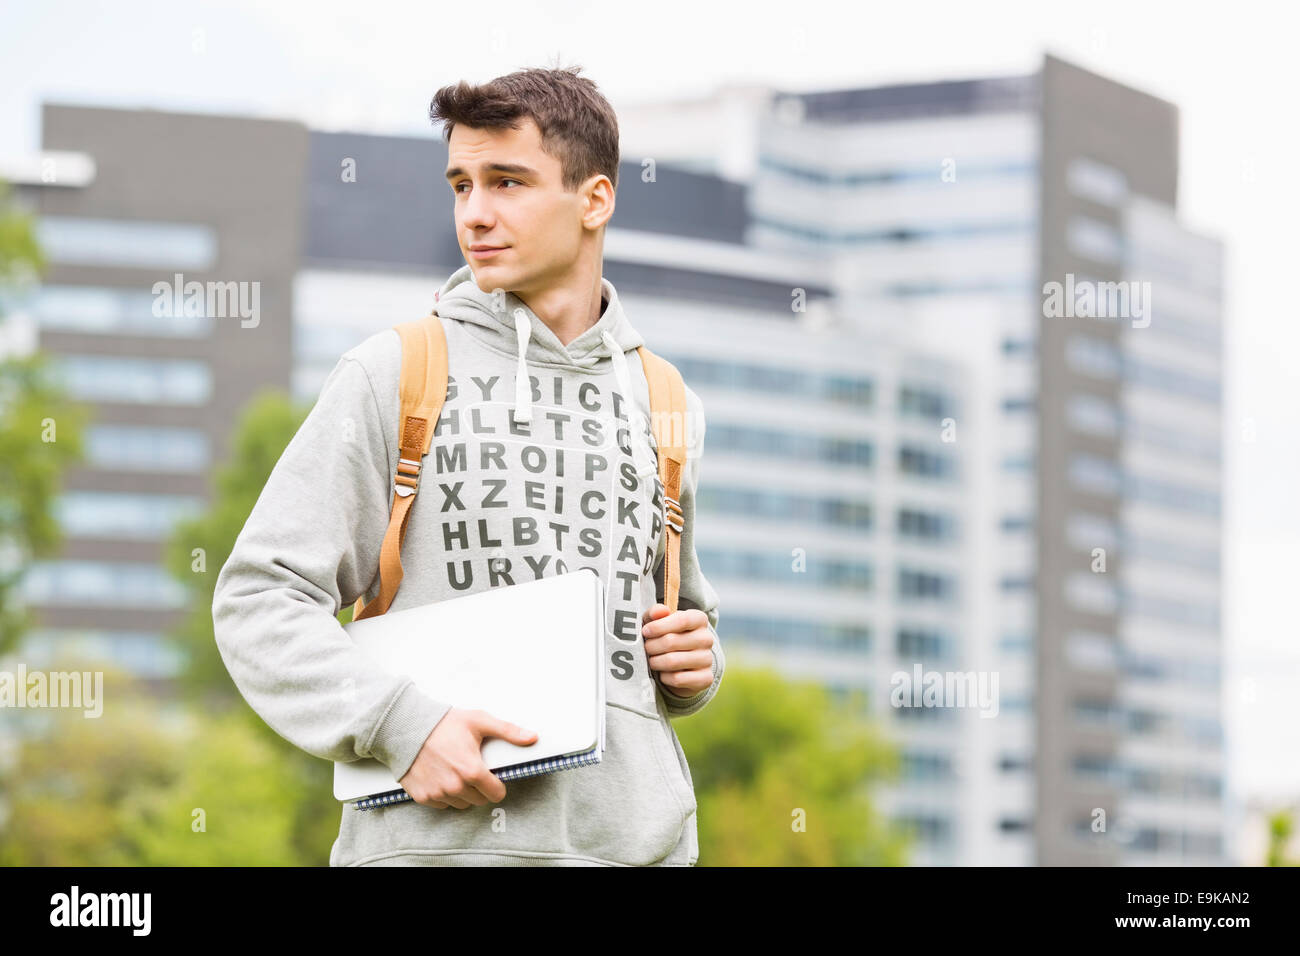 Young male university student holding books at campus Stock Photo